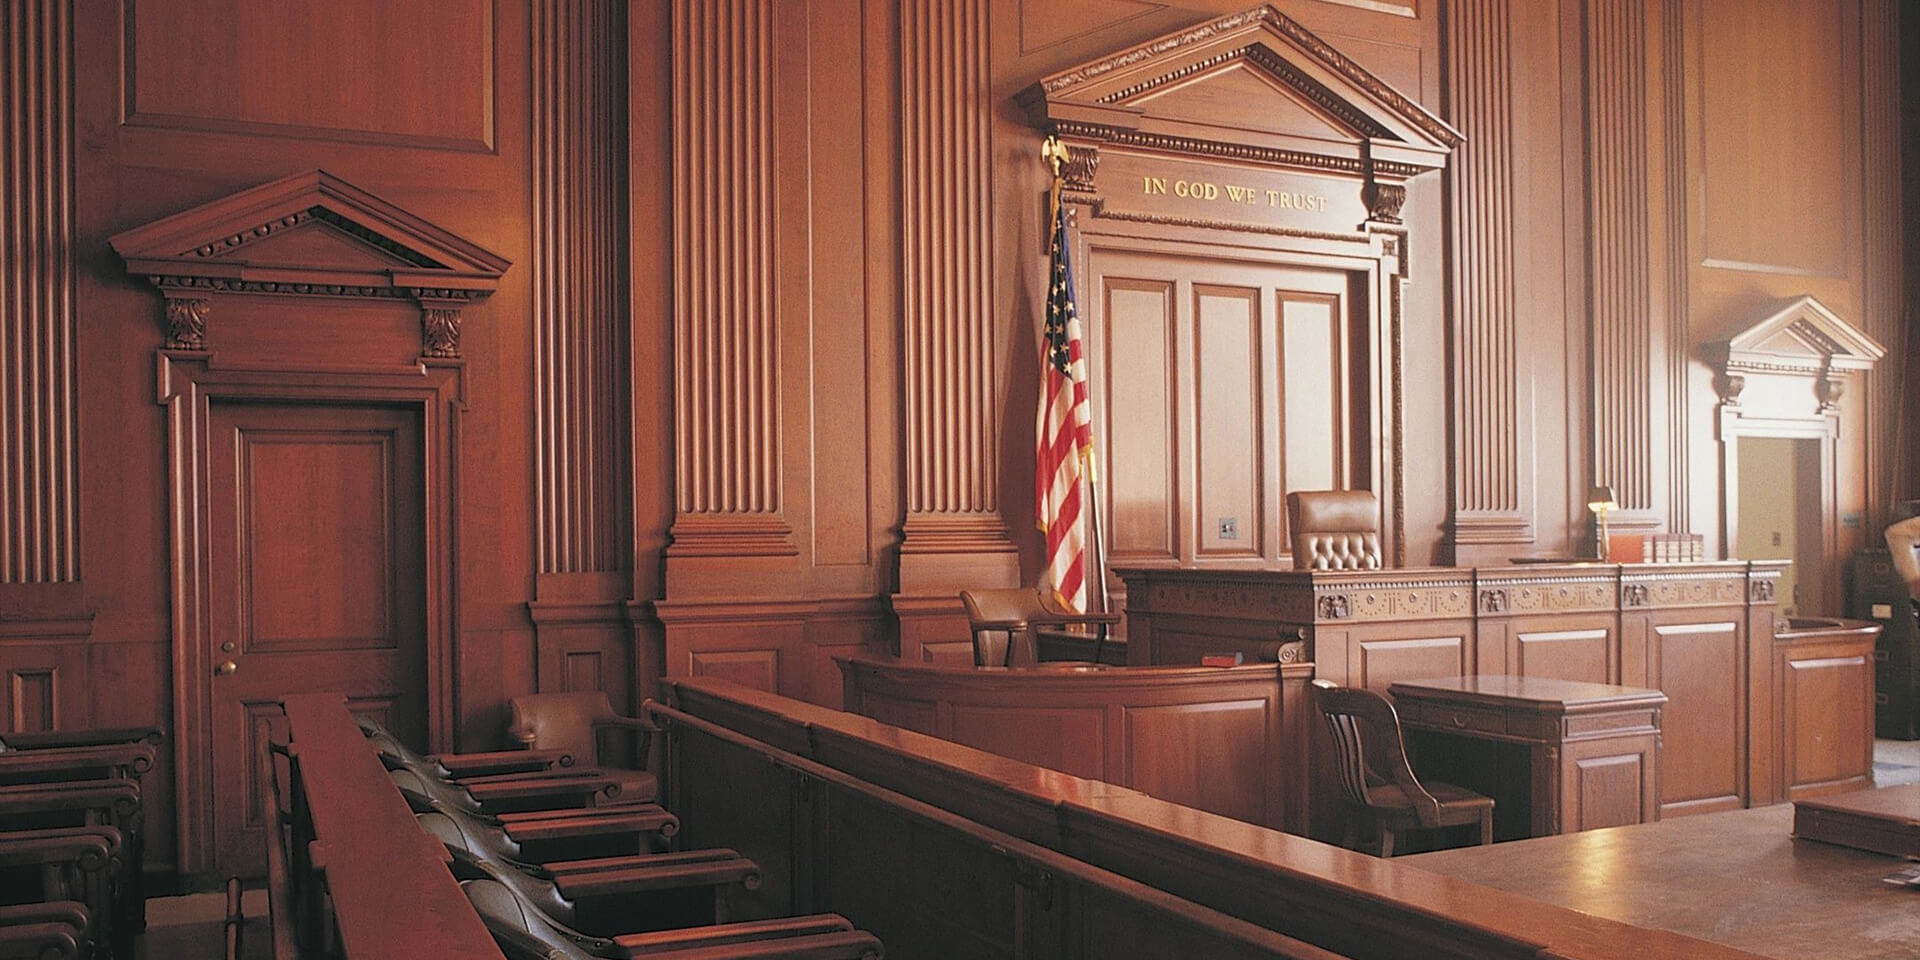 Inside of a courtroom with American flags